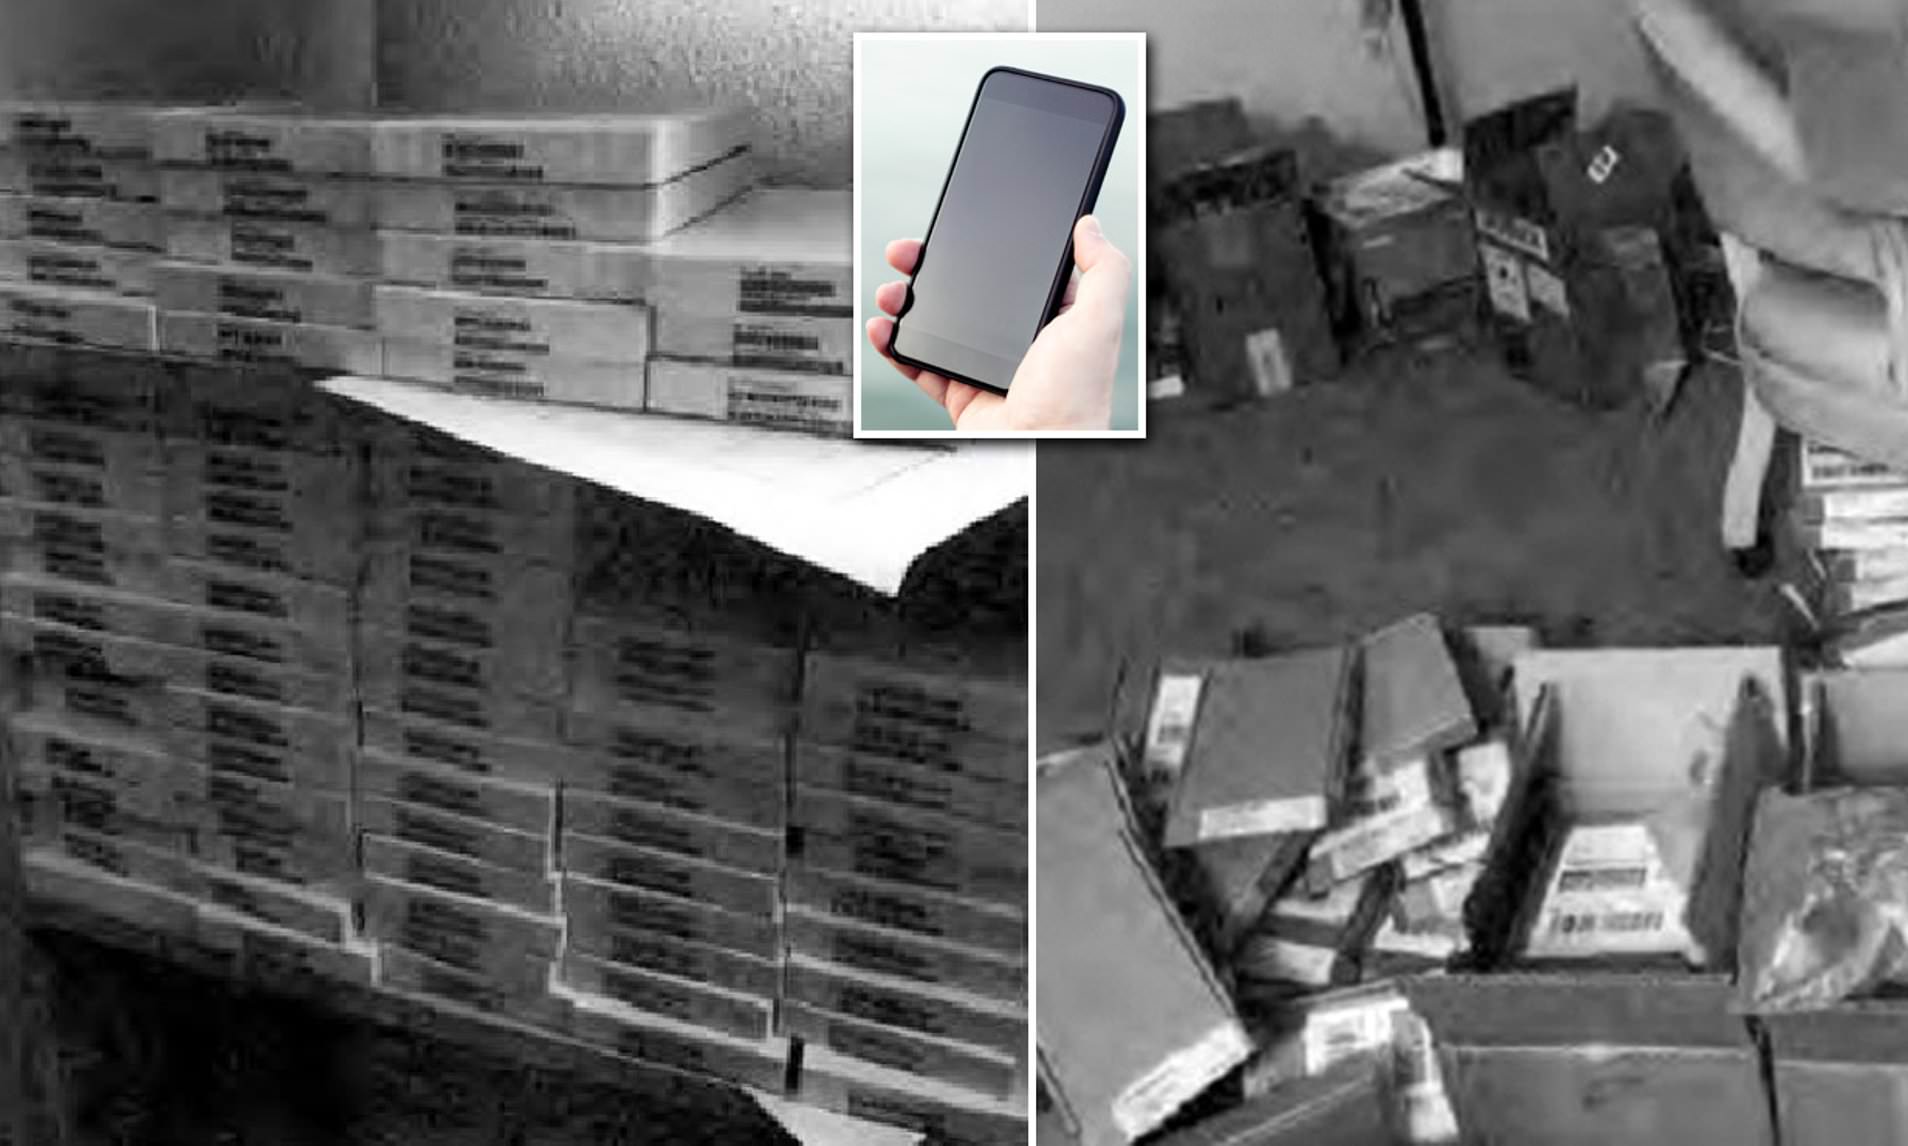 Oregon engineering students from China 'made almost $1million by claiming 1,500 fake iPhones didn't work so they could sell the REAL replacement